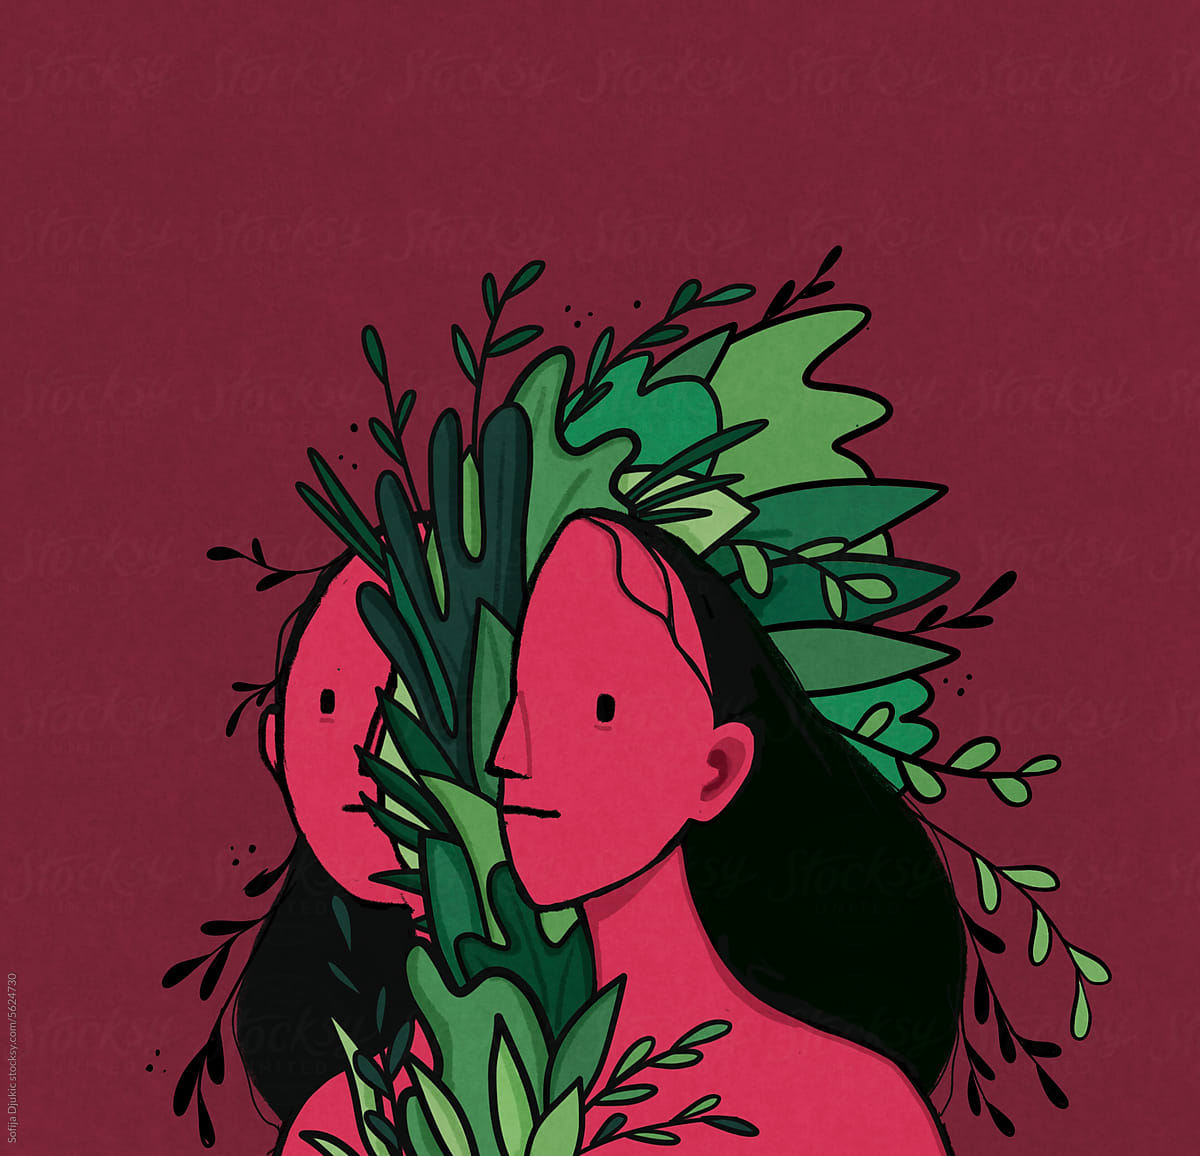 Surreal portrait of a woman with plants growing out her body